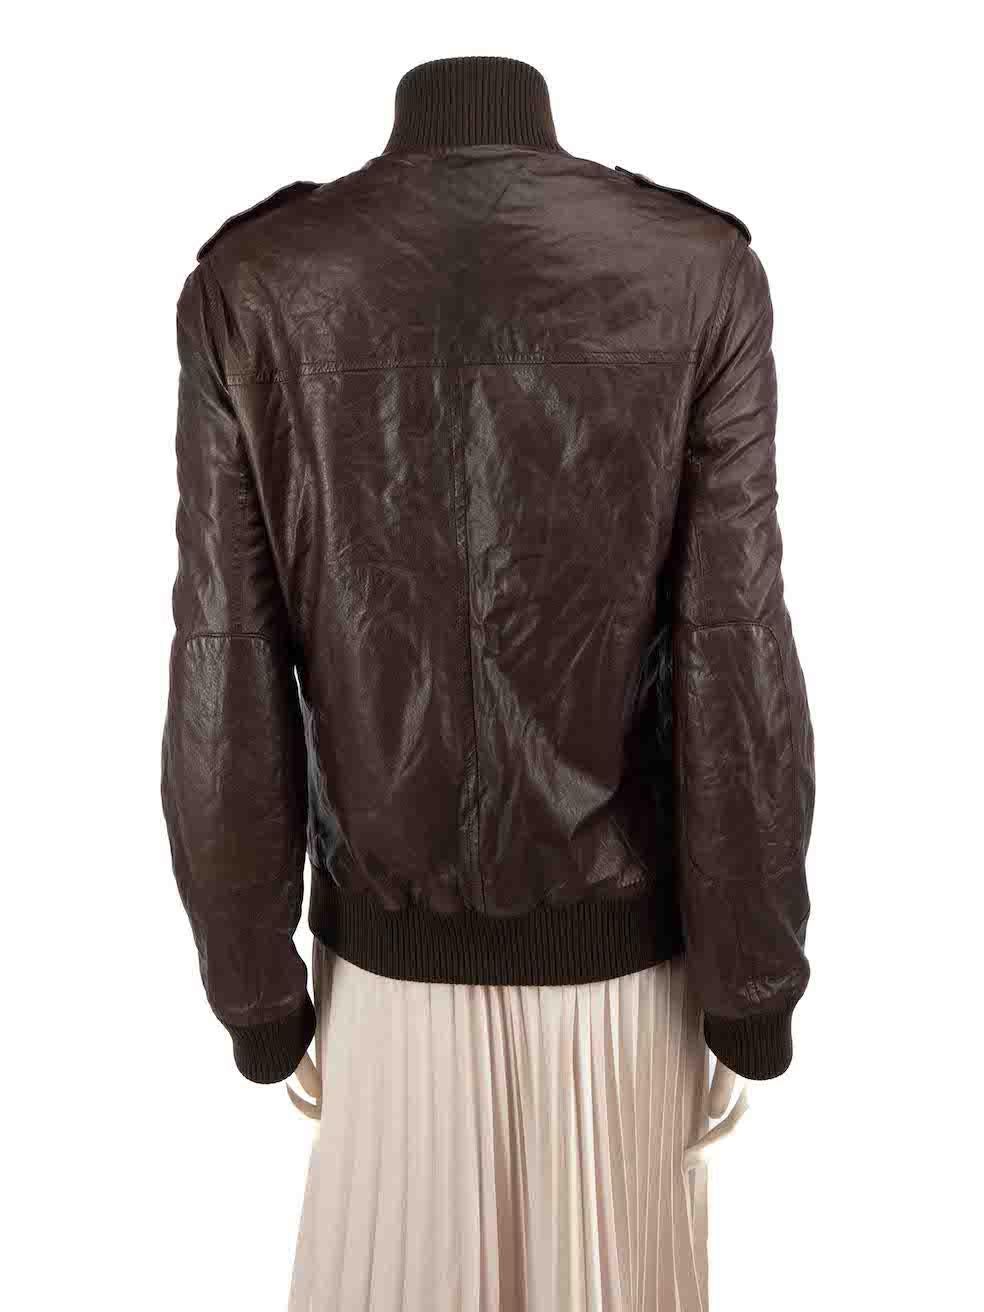 Prada Brown Leather Wool Trimmed Bomber Jacket Size XL In Good Condition For Sale In London, GB